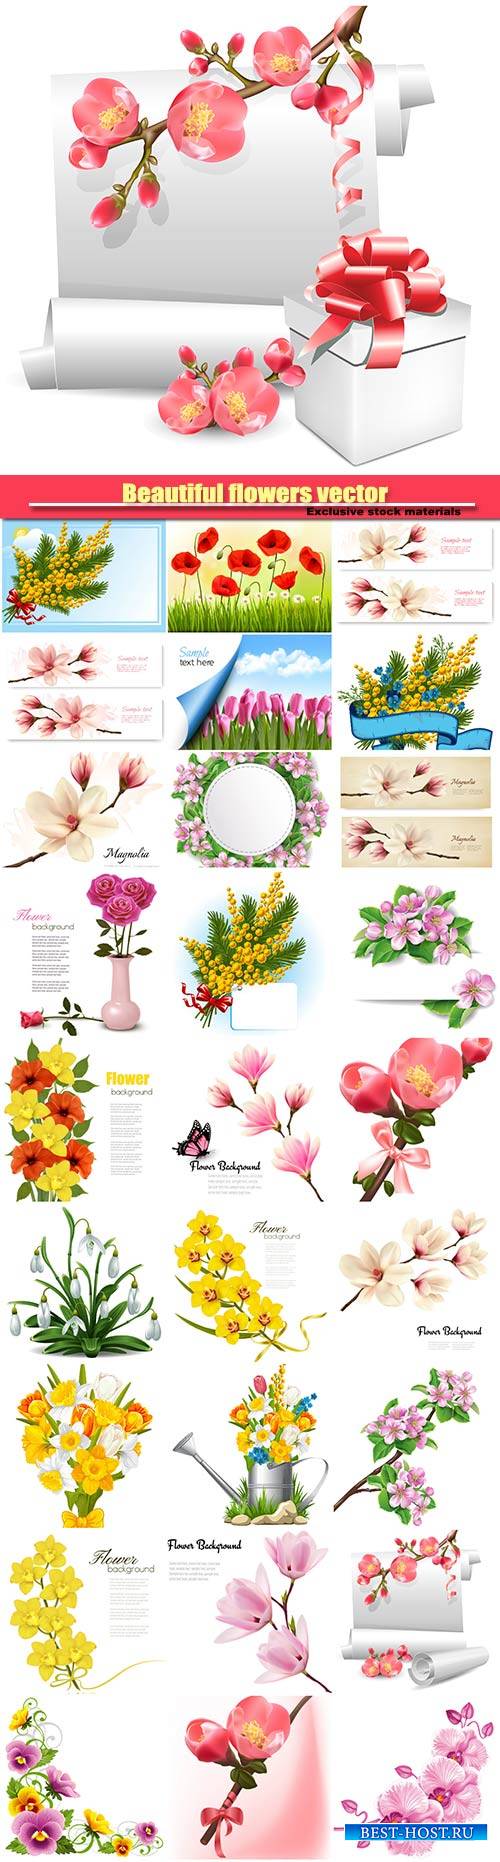 Beautiful flowers vector, daffodils, orchids, magnolia, spring flowers